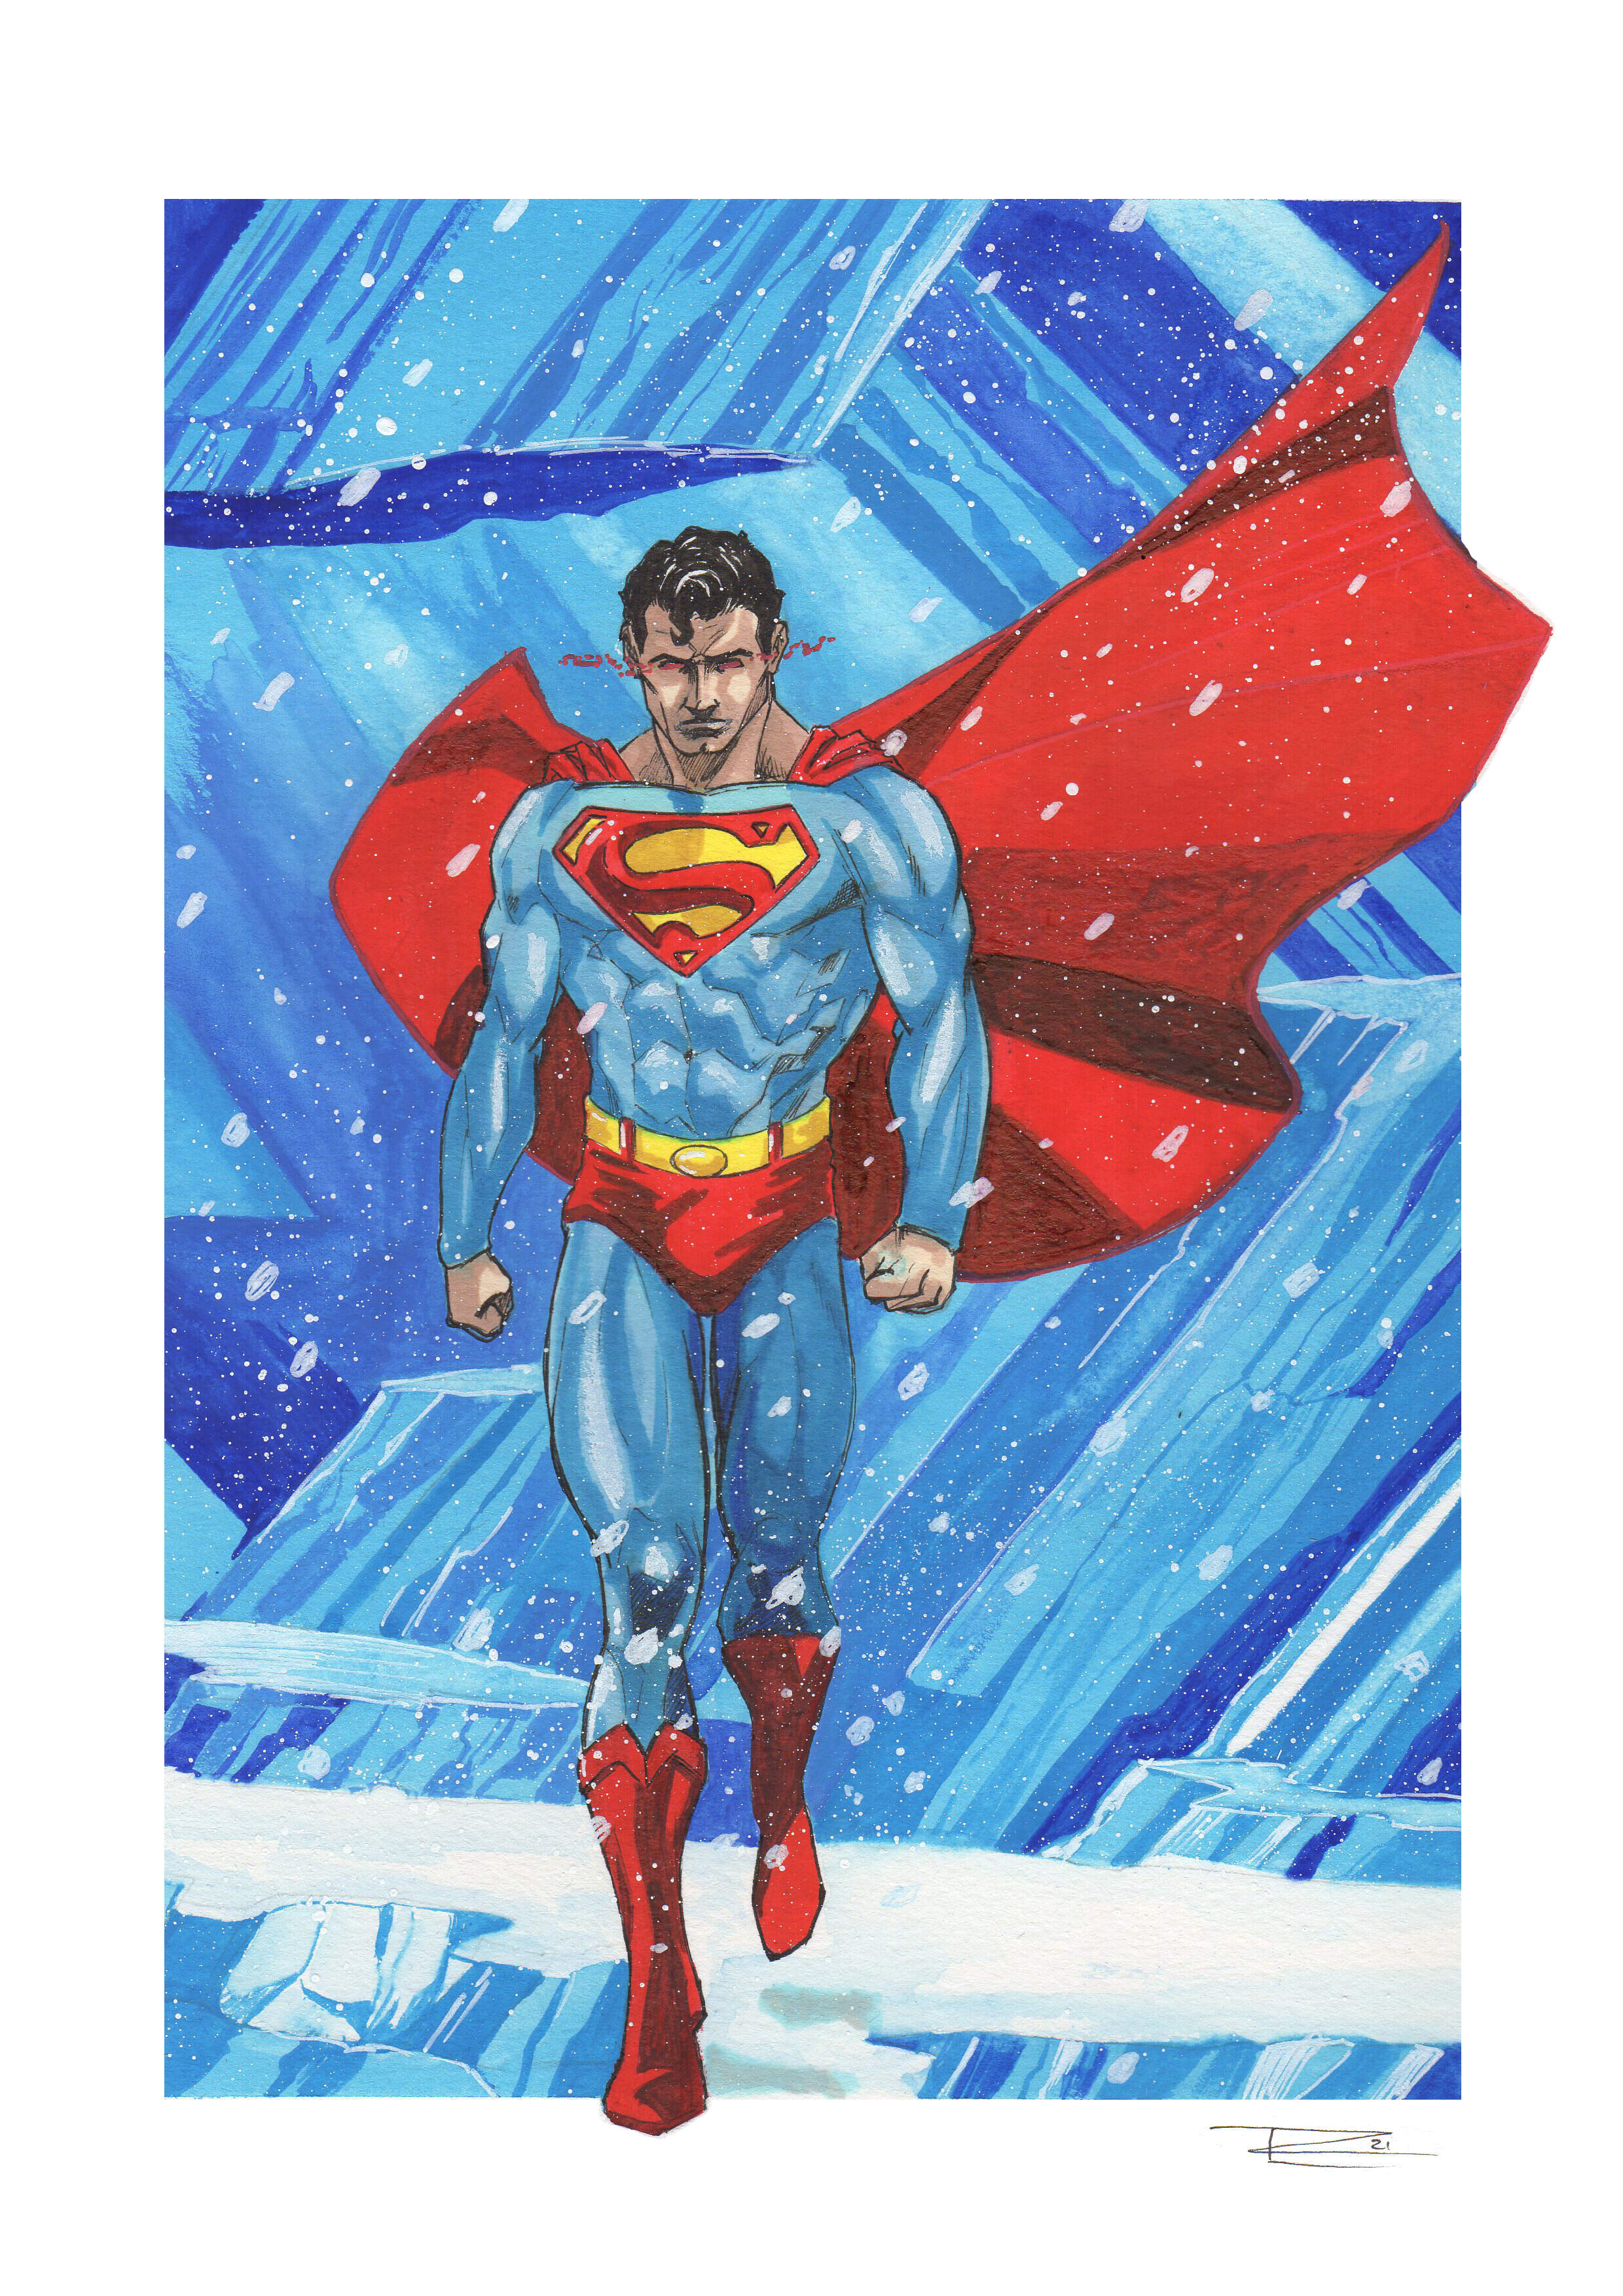 MAN OF STEEL into the snow